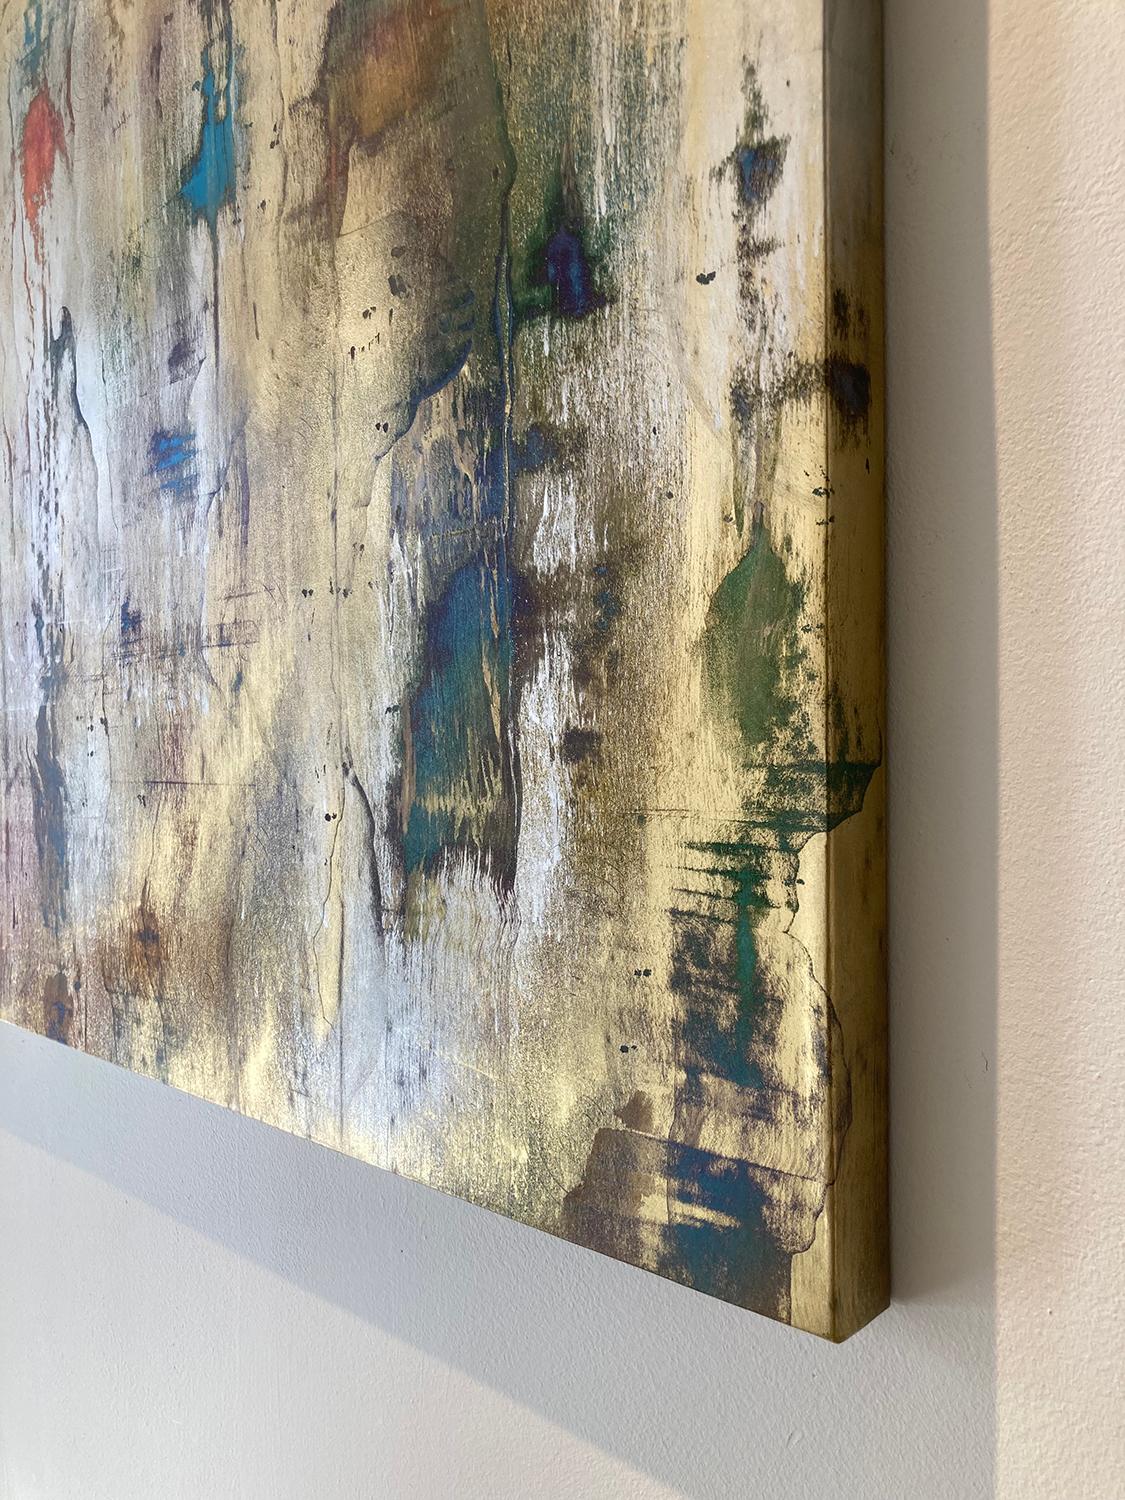 Gestural abstract expressionist painting on archival paper mounted to panel with gold and silver metallic powders and accents of blue, burgundy, green, and purple enamel paint
